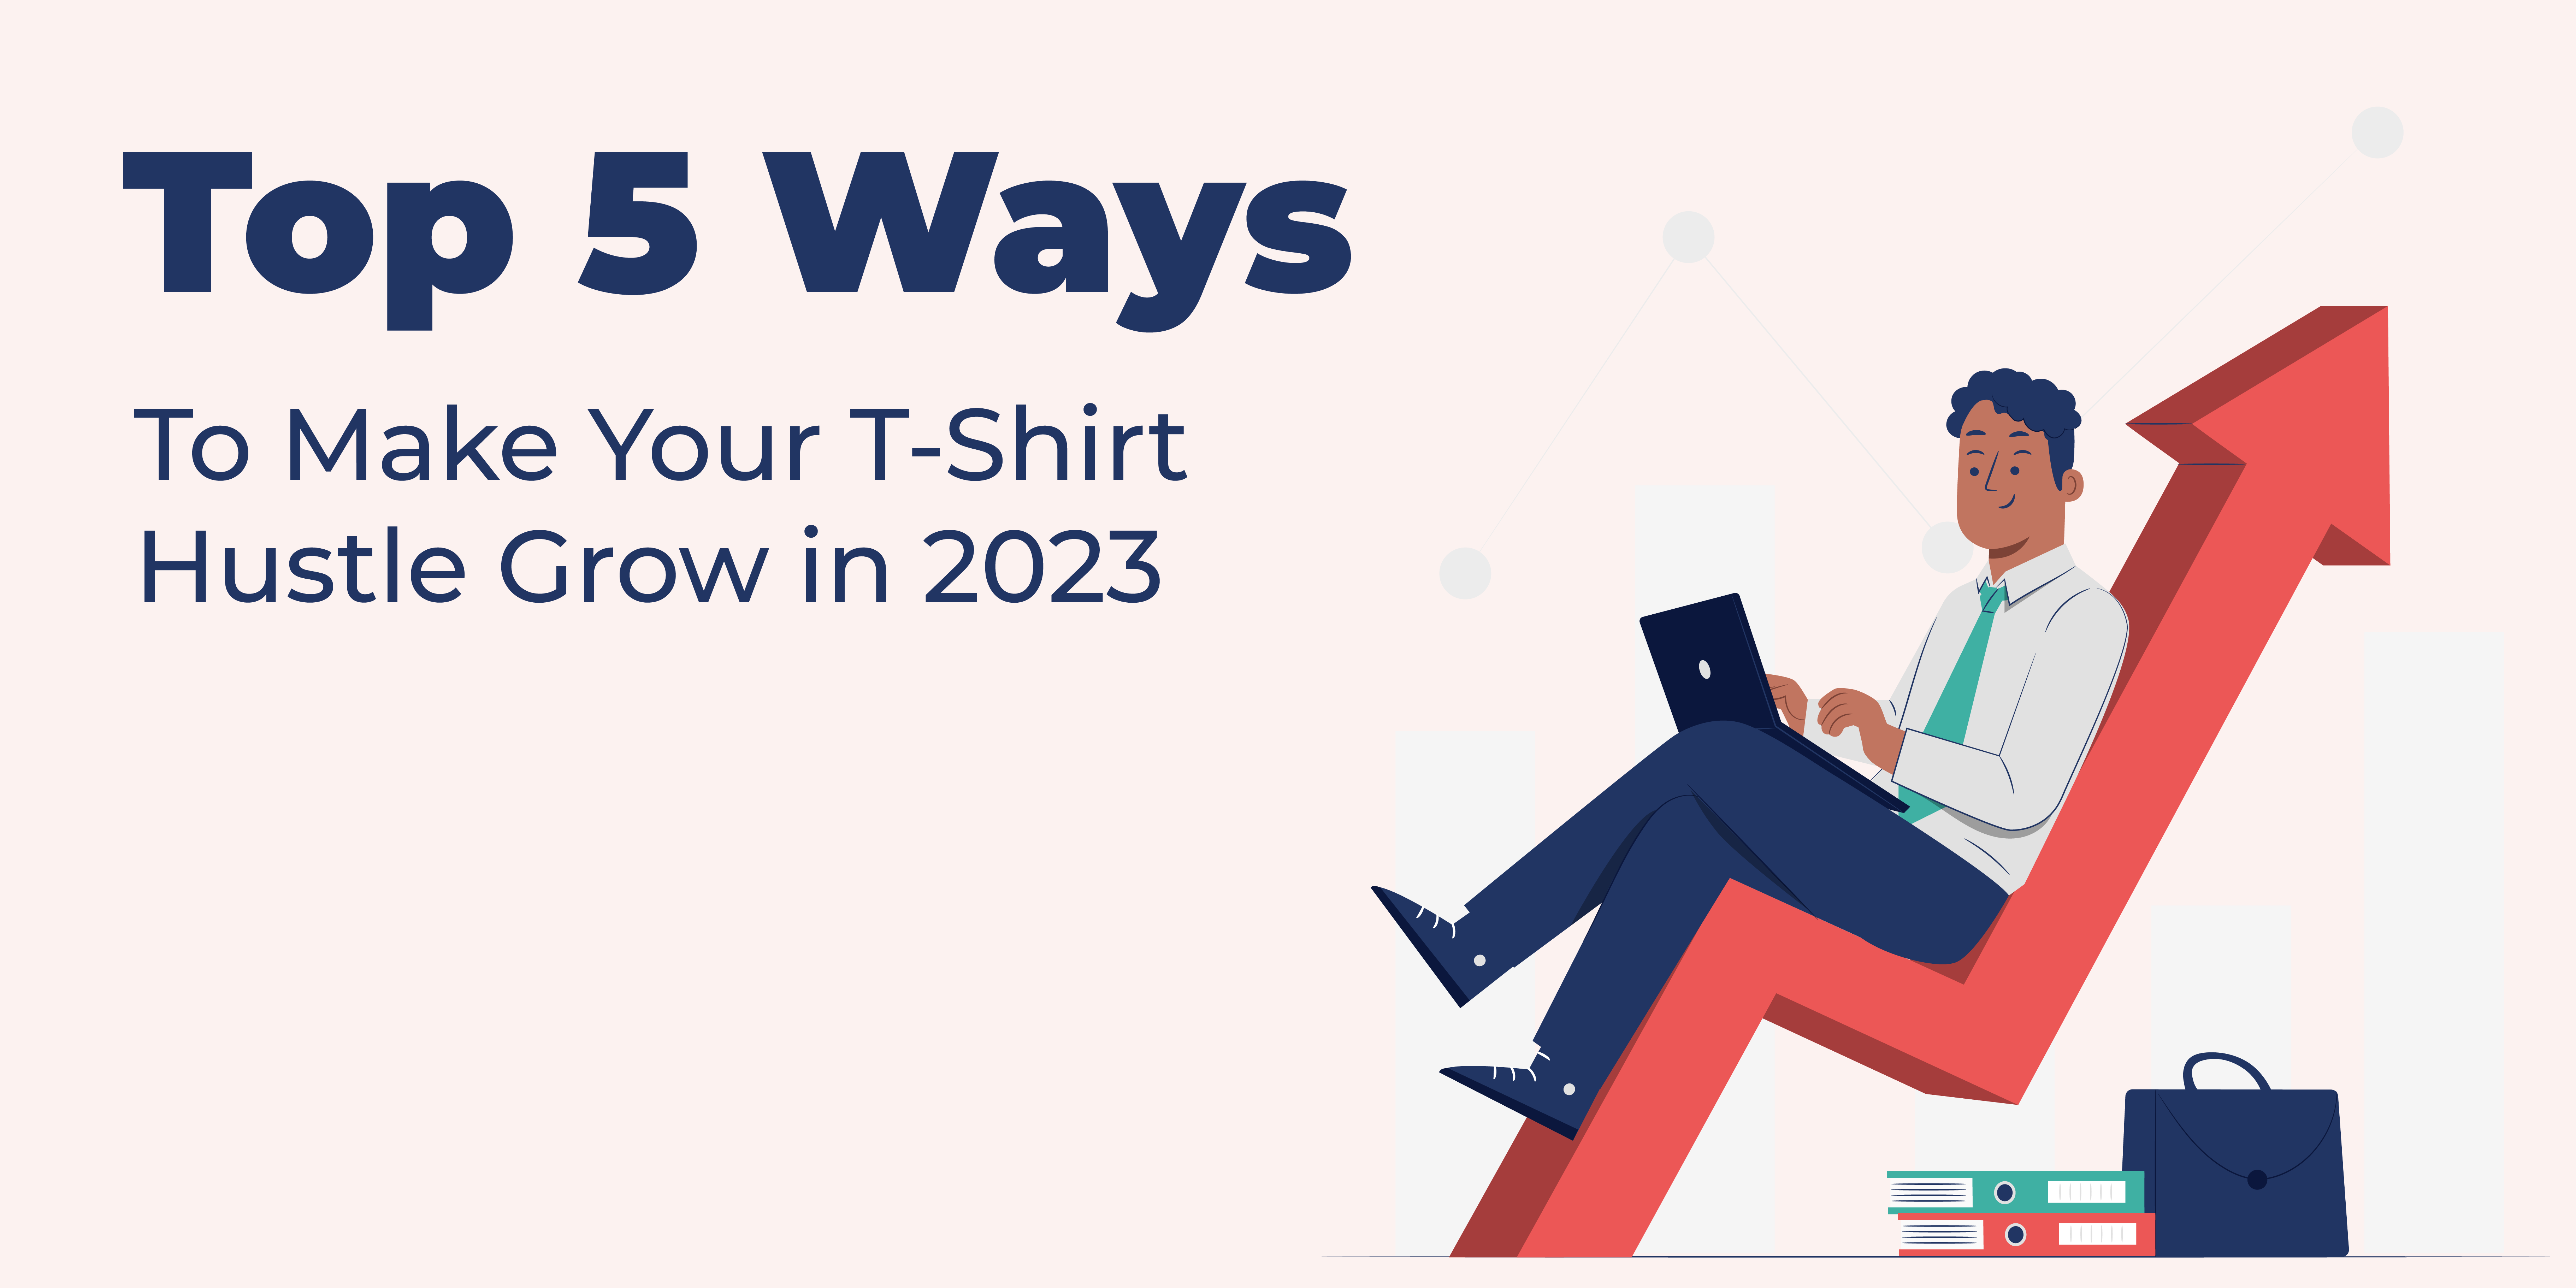 Top 5 Ways To Make Your T-Shirt Hustle Grow in 2023